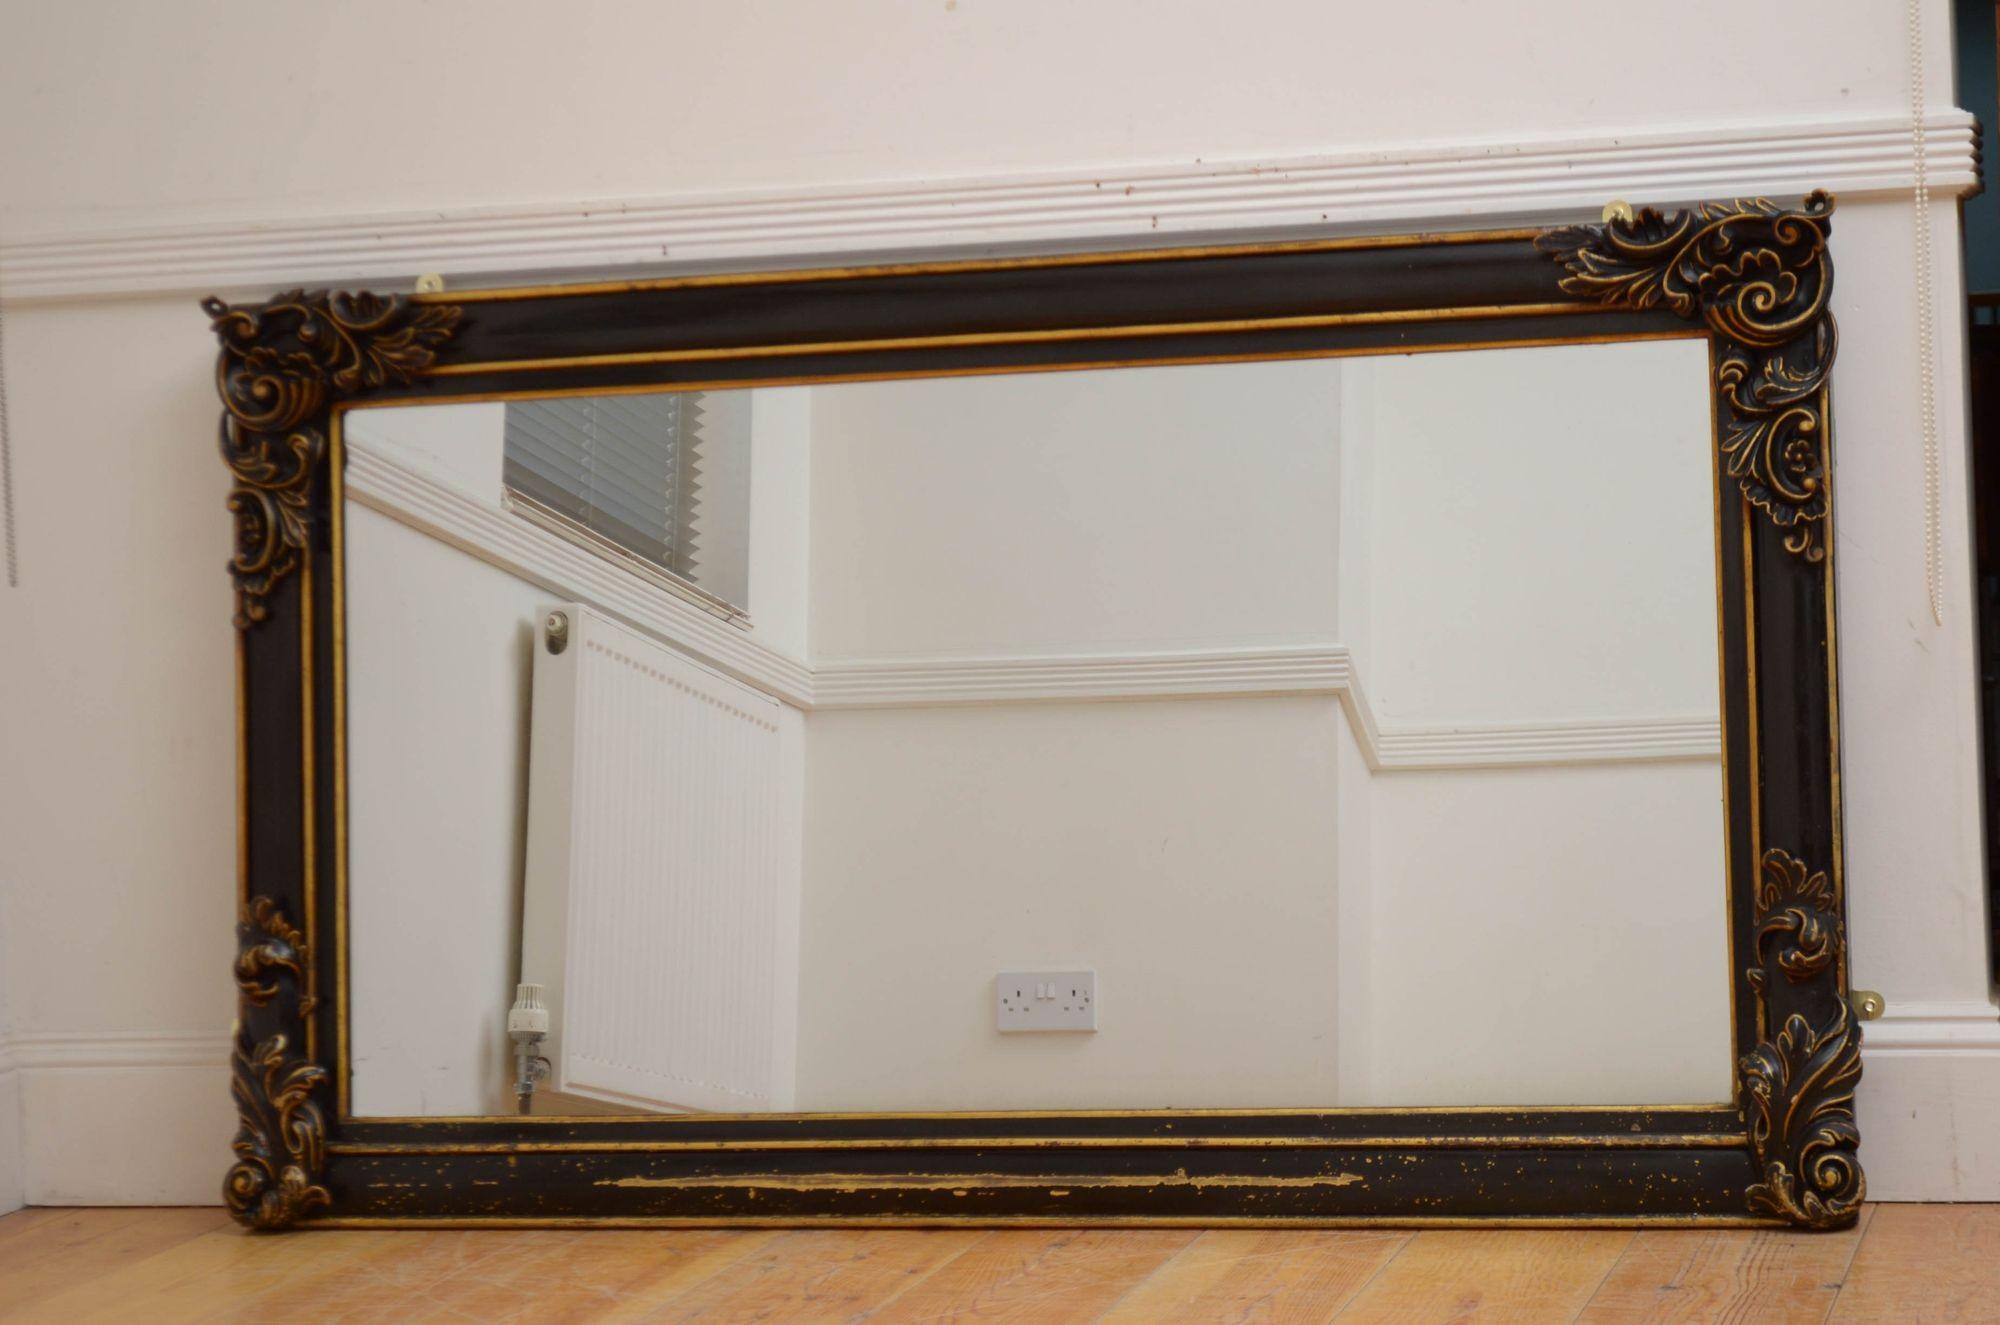 Sn5510 Stylish Victorian ebonised wall mirror, having original glass with some imperfections in moulded and shaped ebonised frame with fine floral carvings to corners. This antique mirror was refinished in the past, now showing minor usage marks,